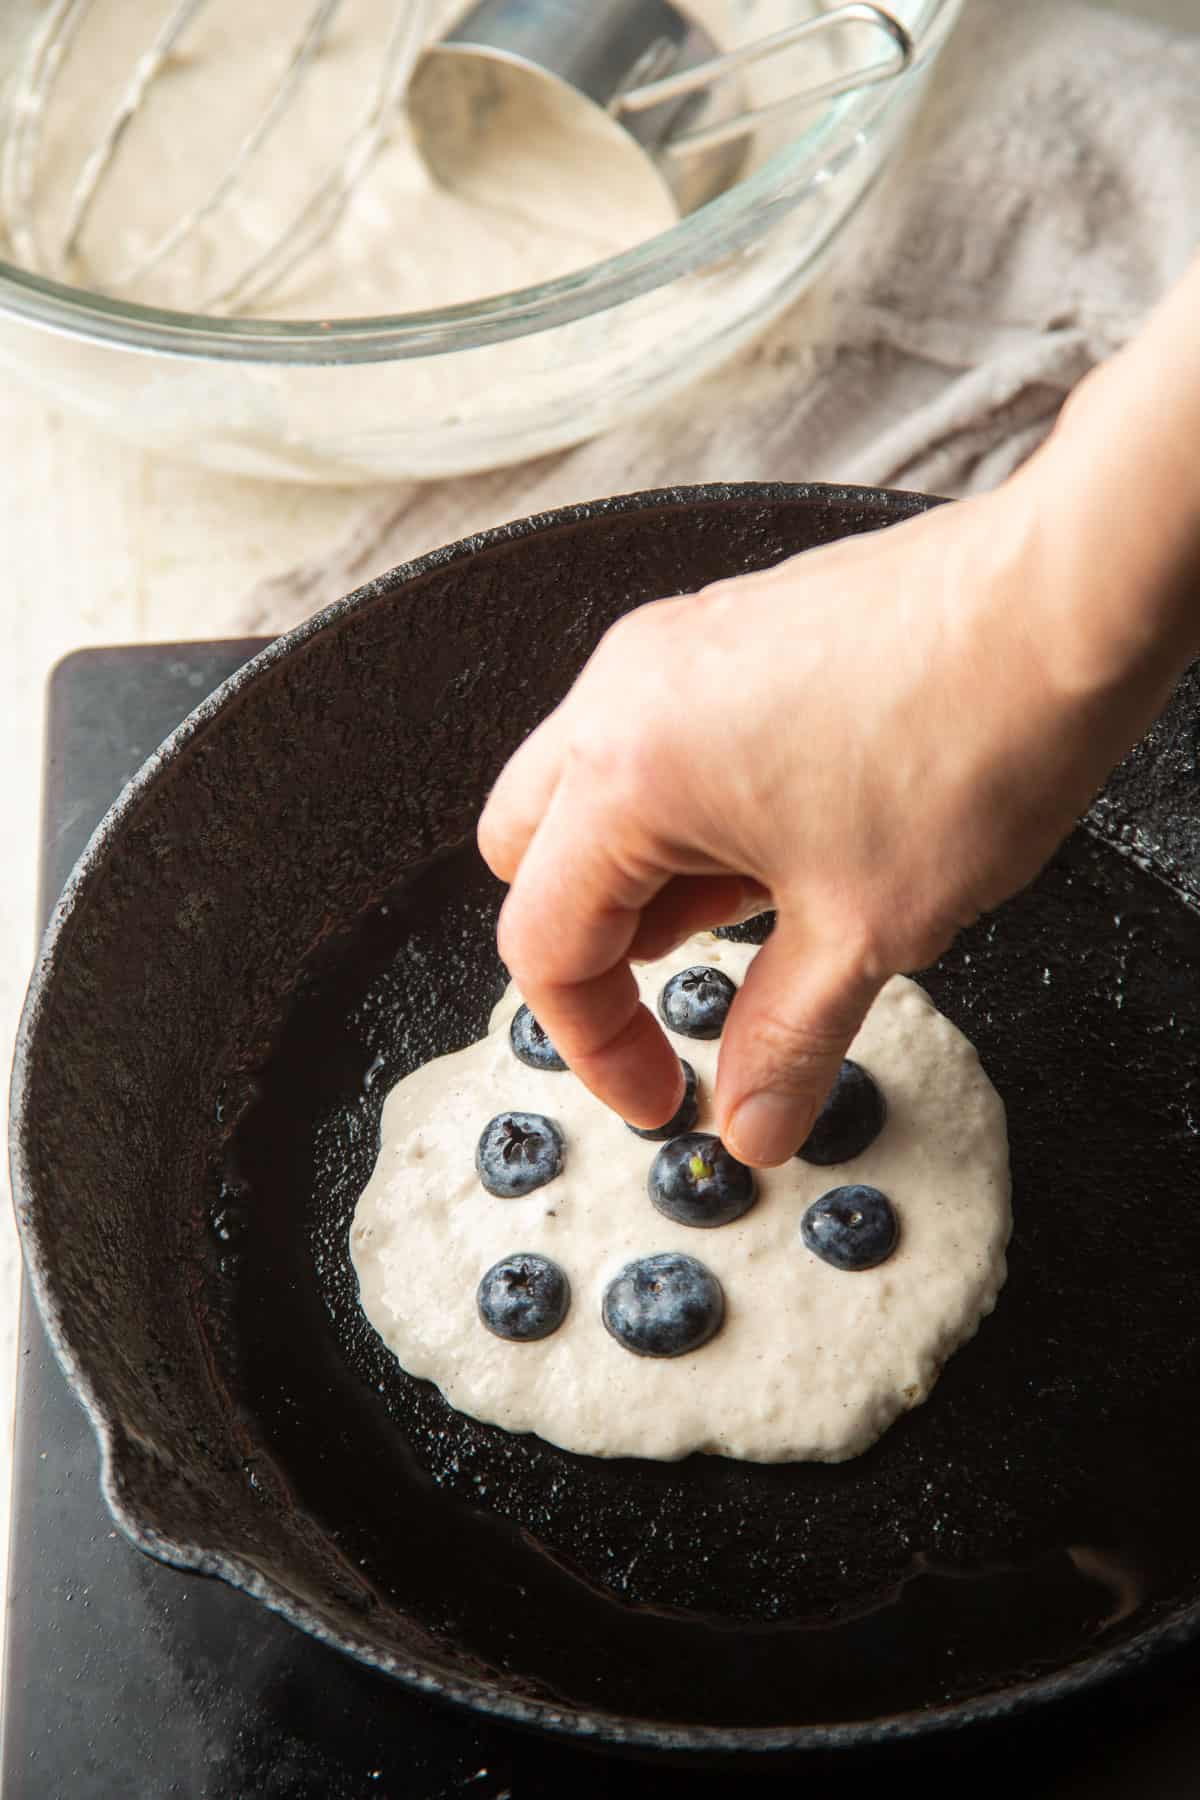 Hand place the blueberries on a spoonful of pancake batter that is cooking in a pan.